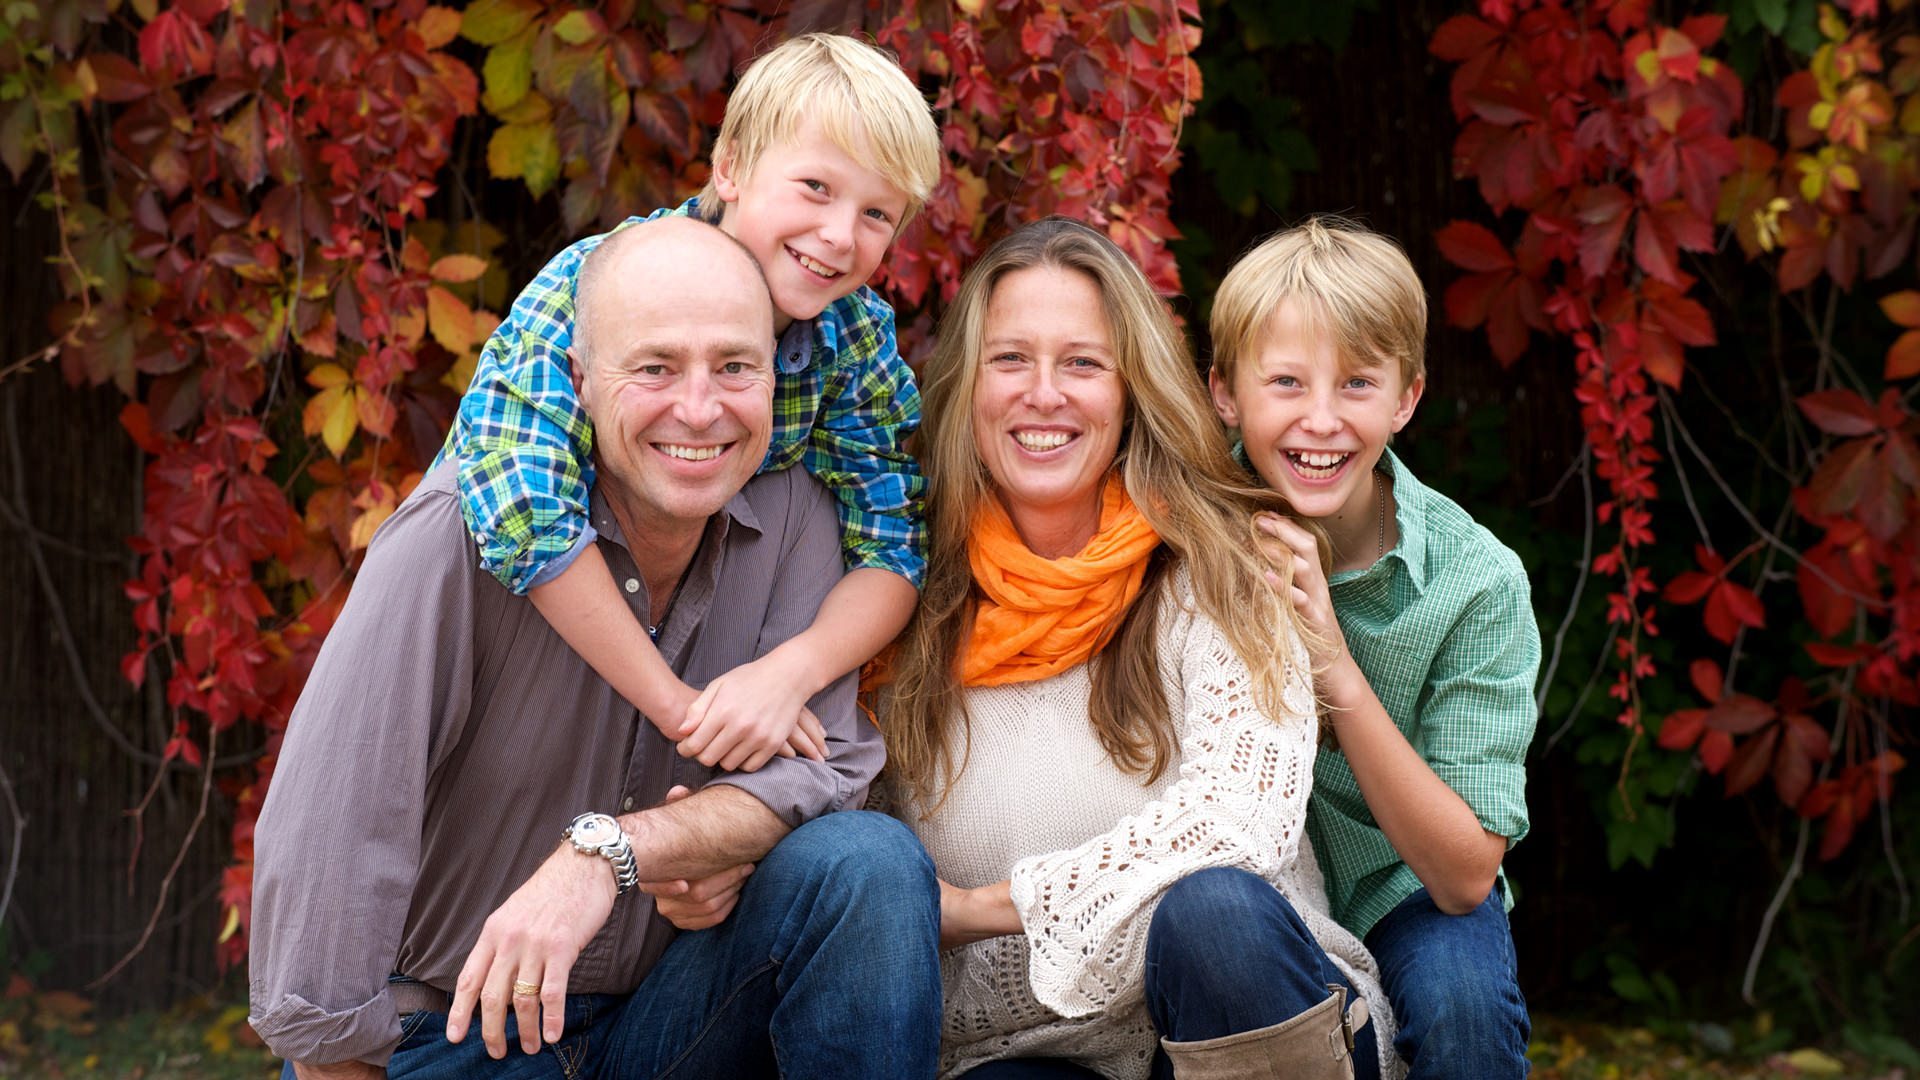 The best family portrait photographer in Boulder, CO